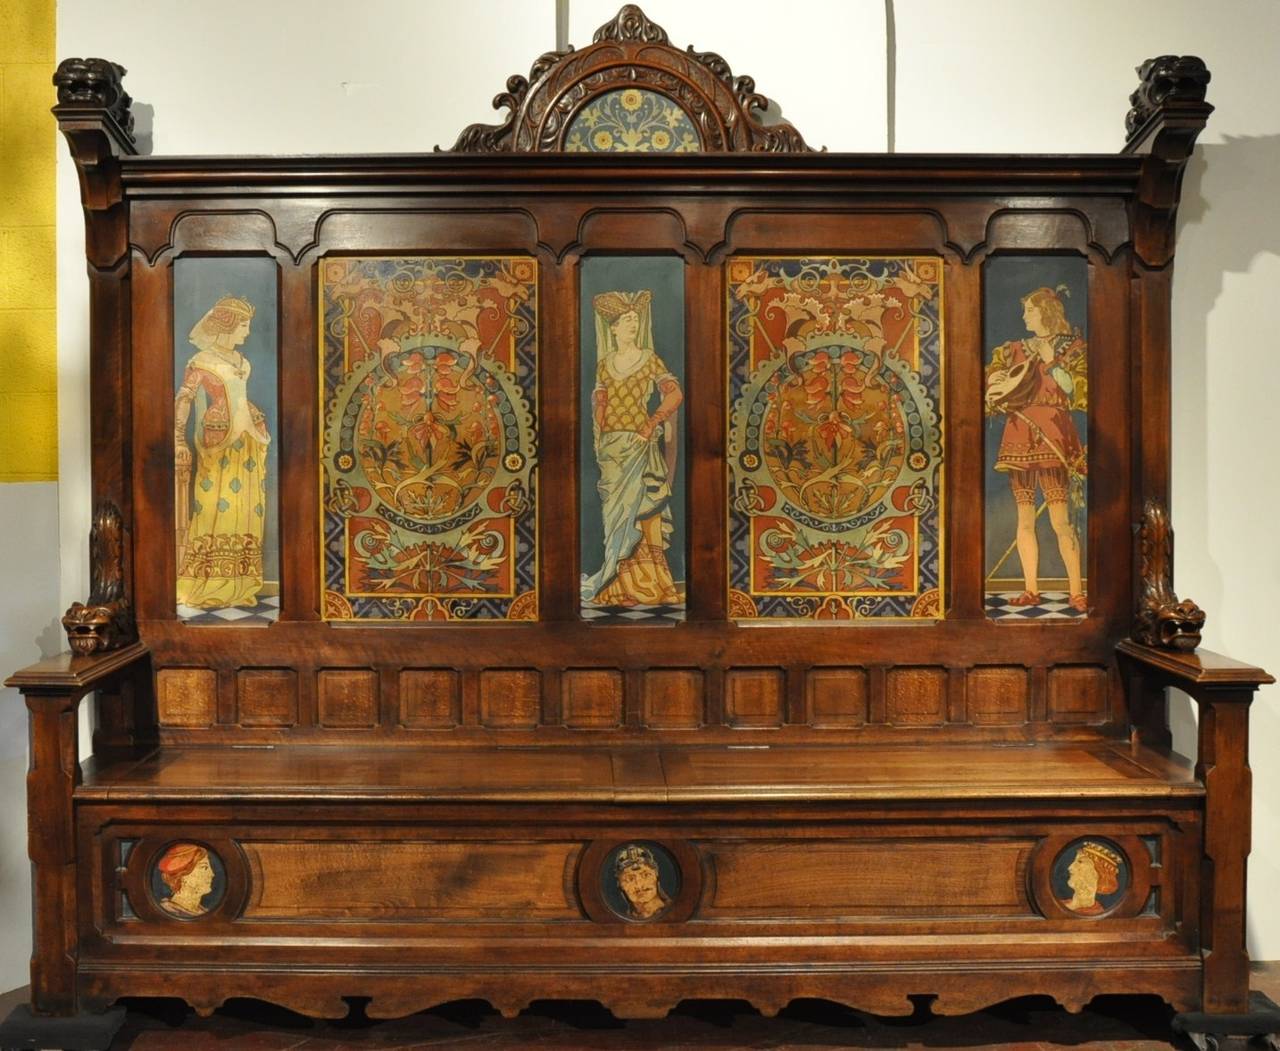 Exceptional and massive 19th century walnut bench with 9 hand painted porcelain plaques. This bench is signed in the back 